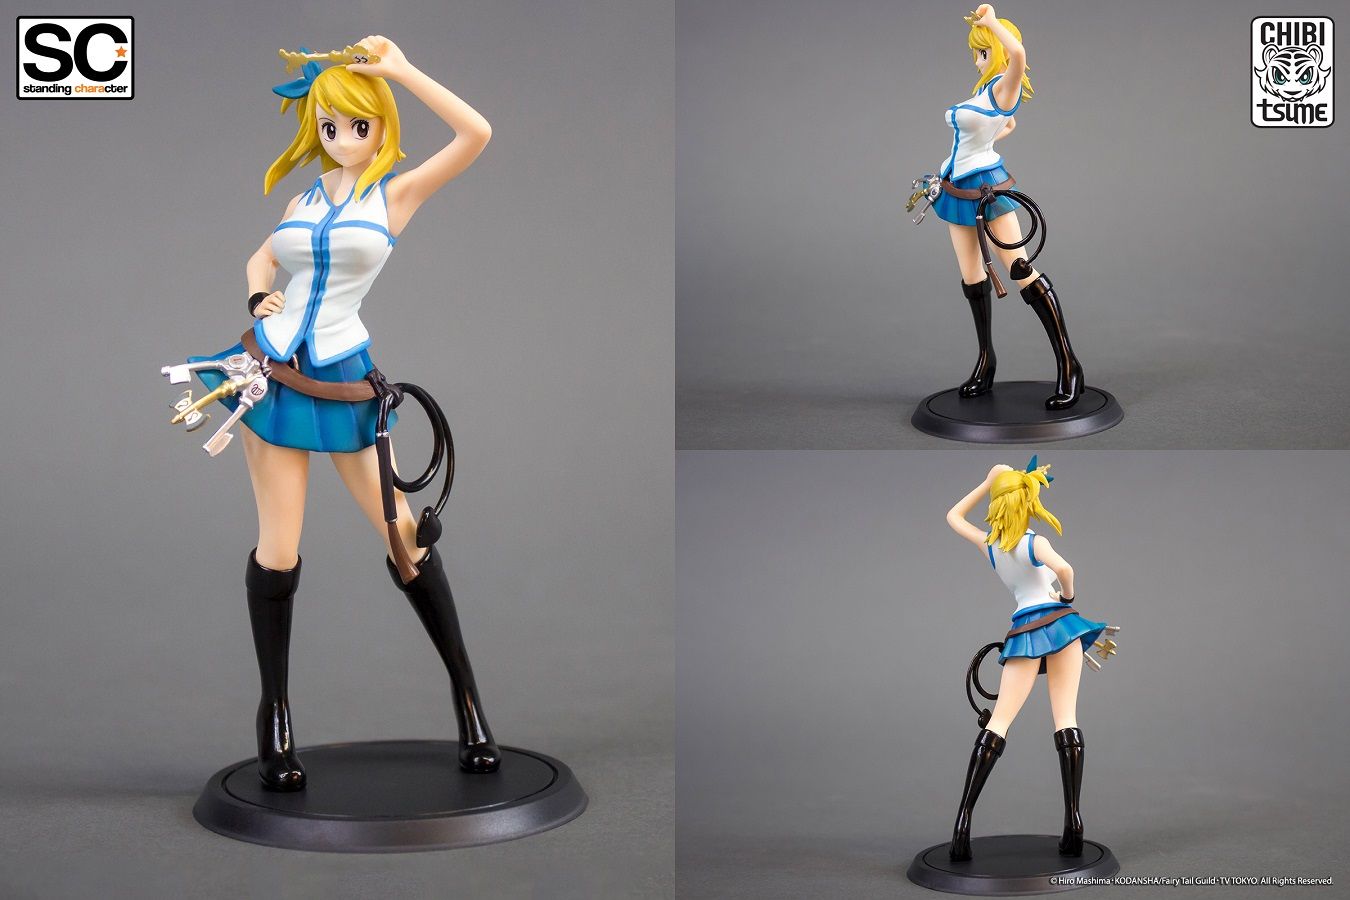 goodie - Lucy Heartfilia- SC - Standing Characters - Tsume